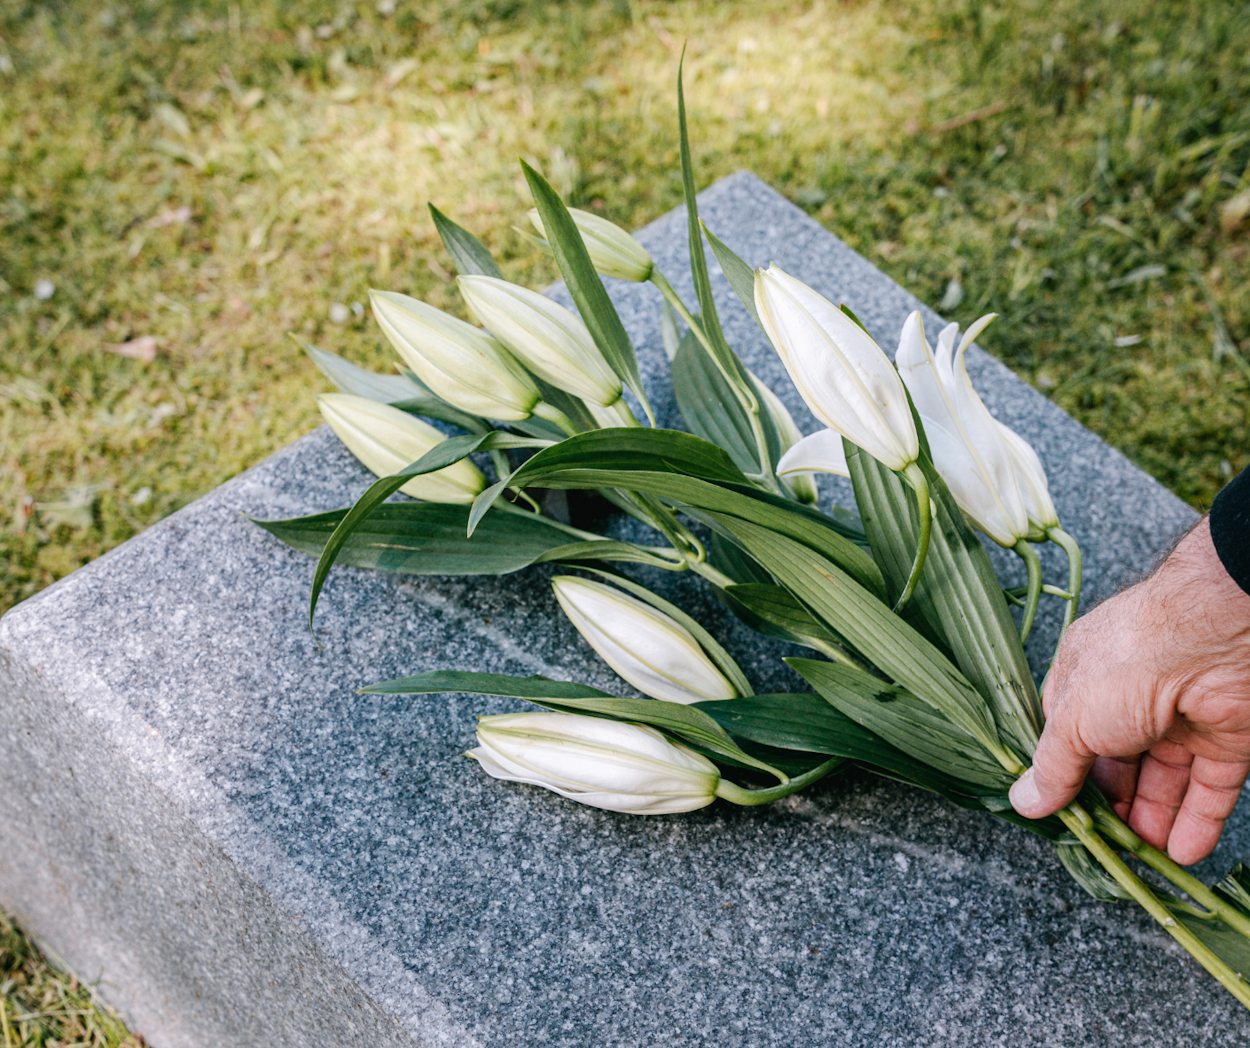 3 subtle ways to mark the place of a loved one’s scattered ashes